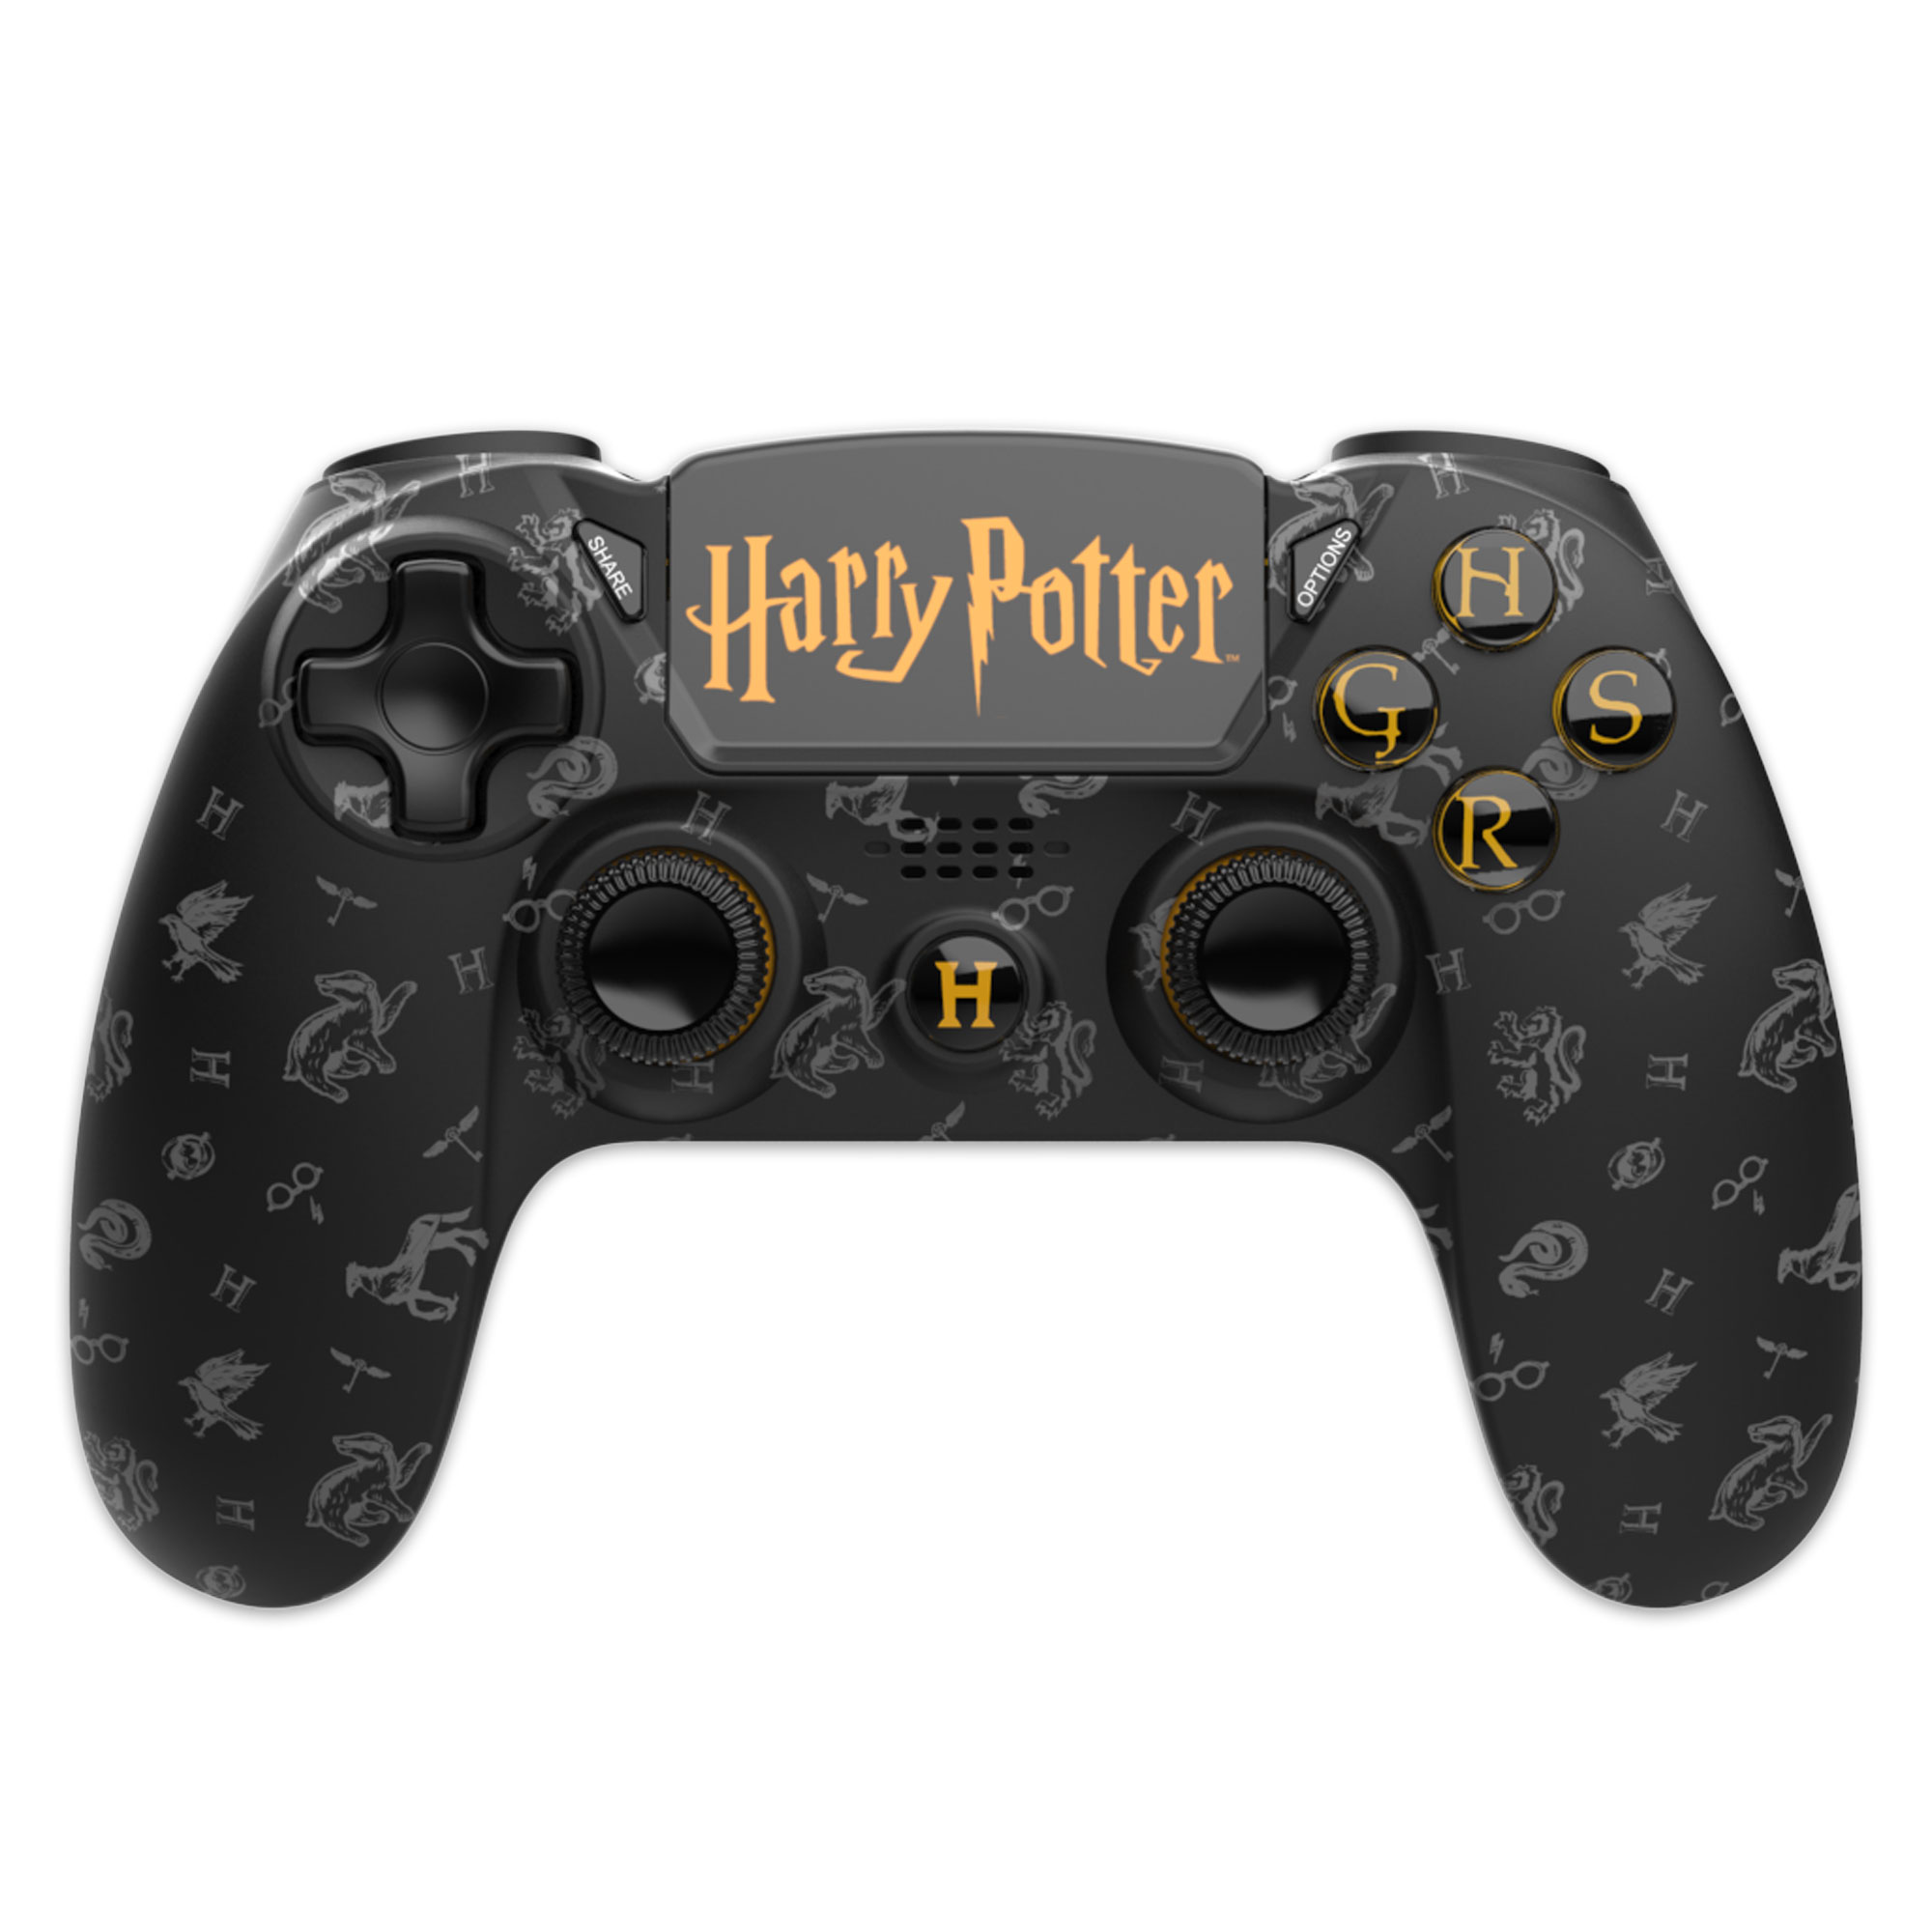 Buy Harry Potter - Wireless controller - Black - PlayStation 4 - Black -  Standard - English - Free shipping